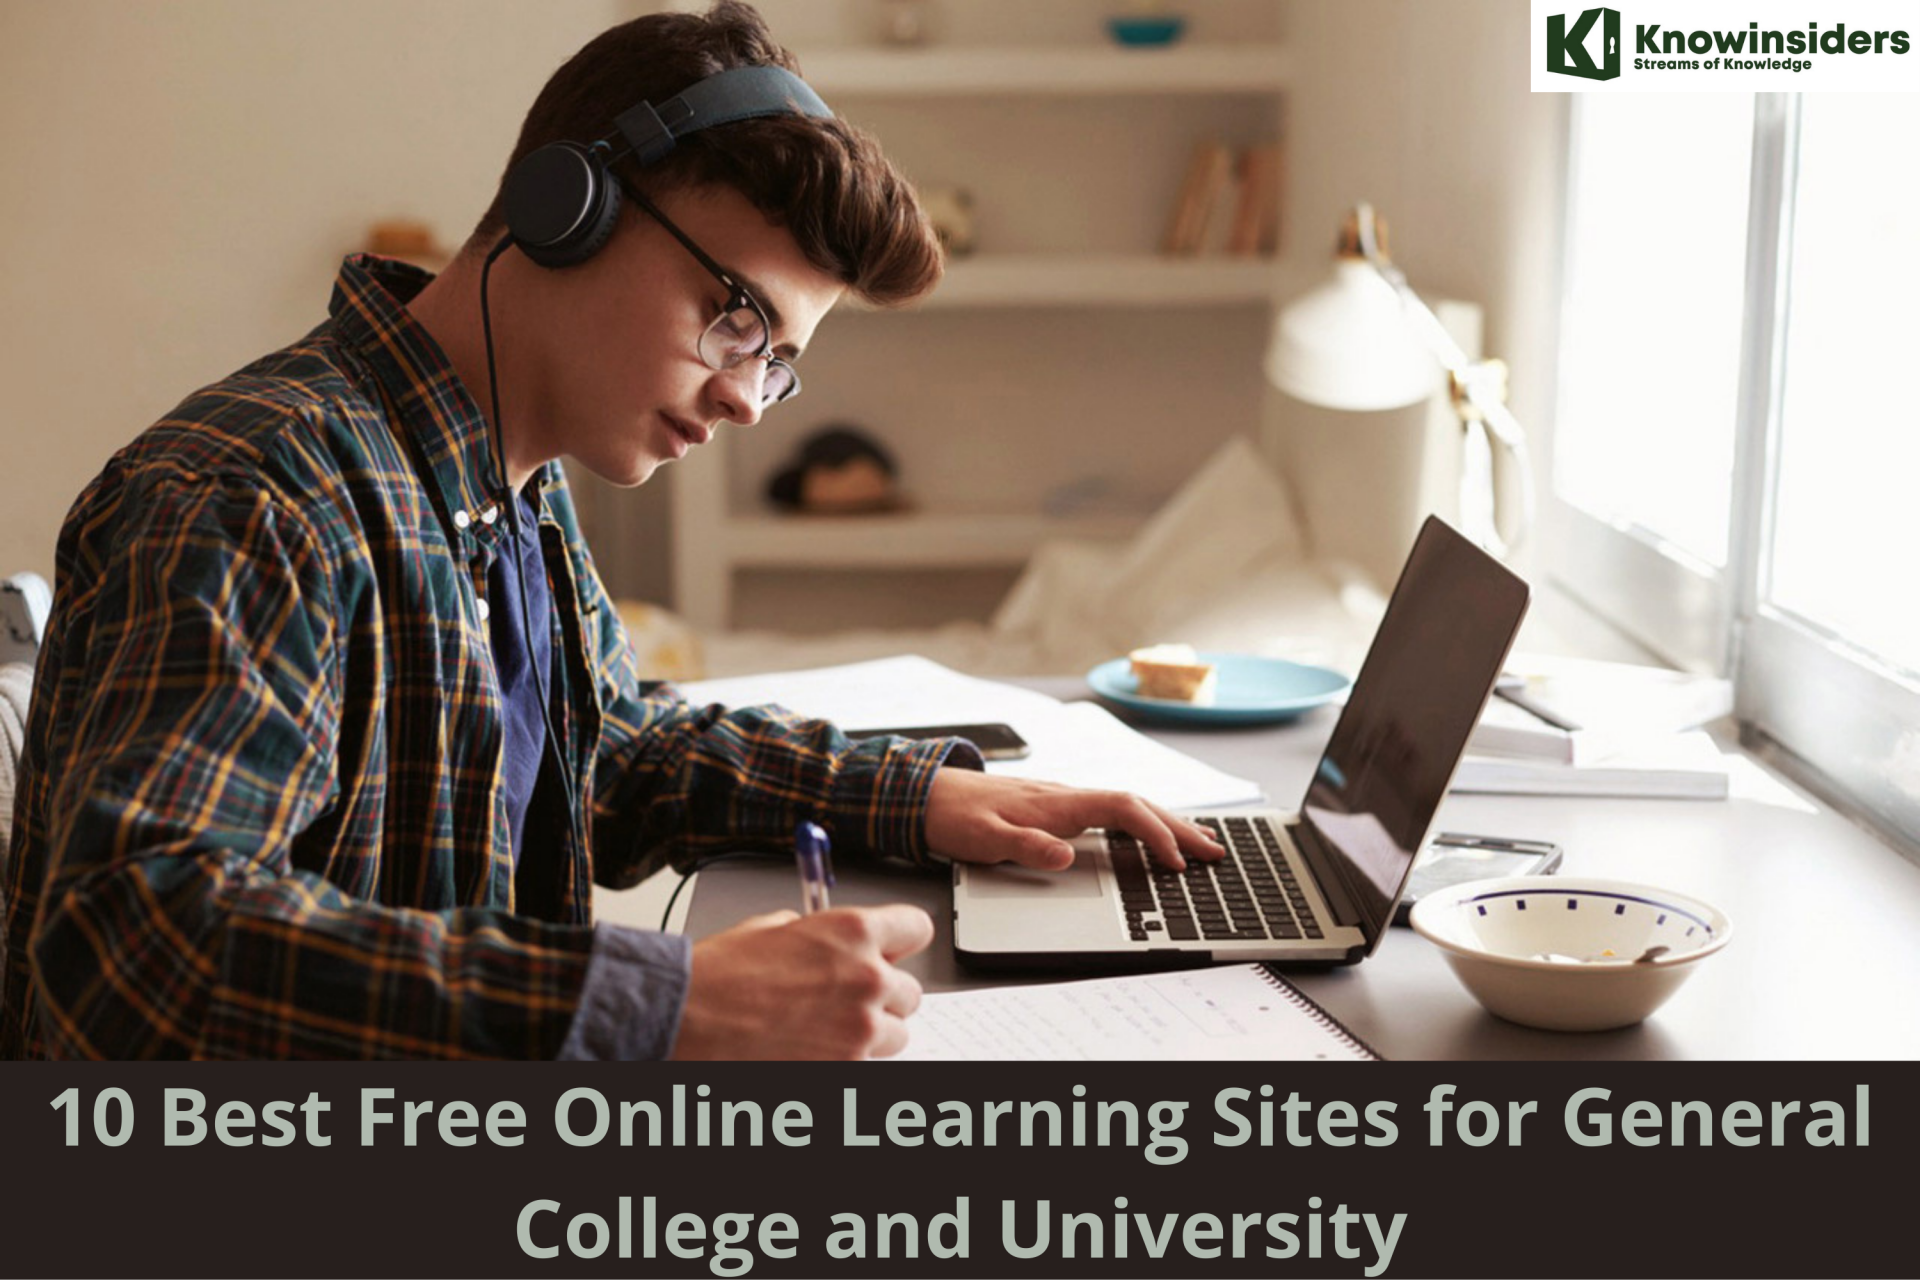 10 Best Free Online Learning Sites for General College & University